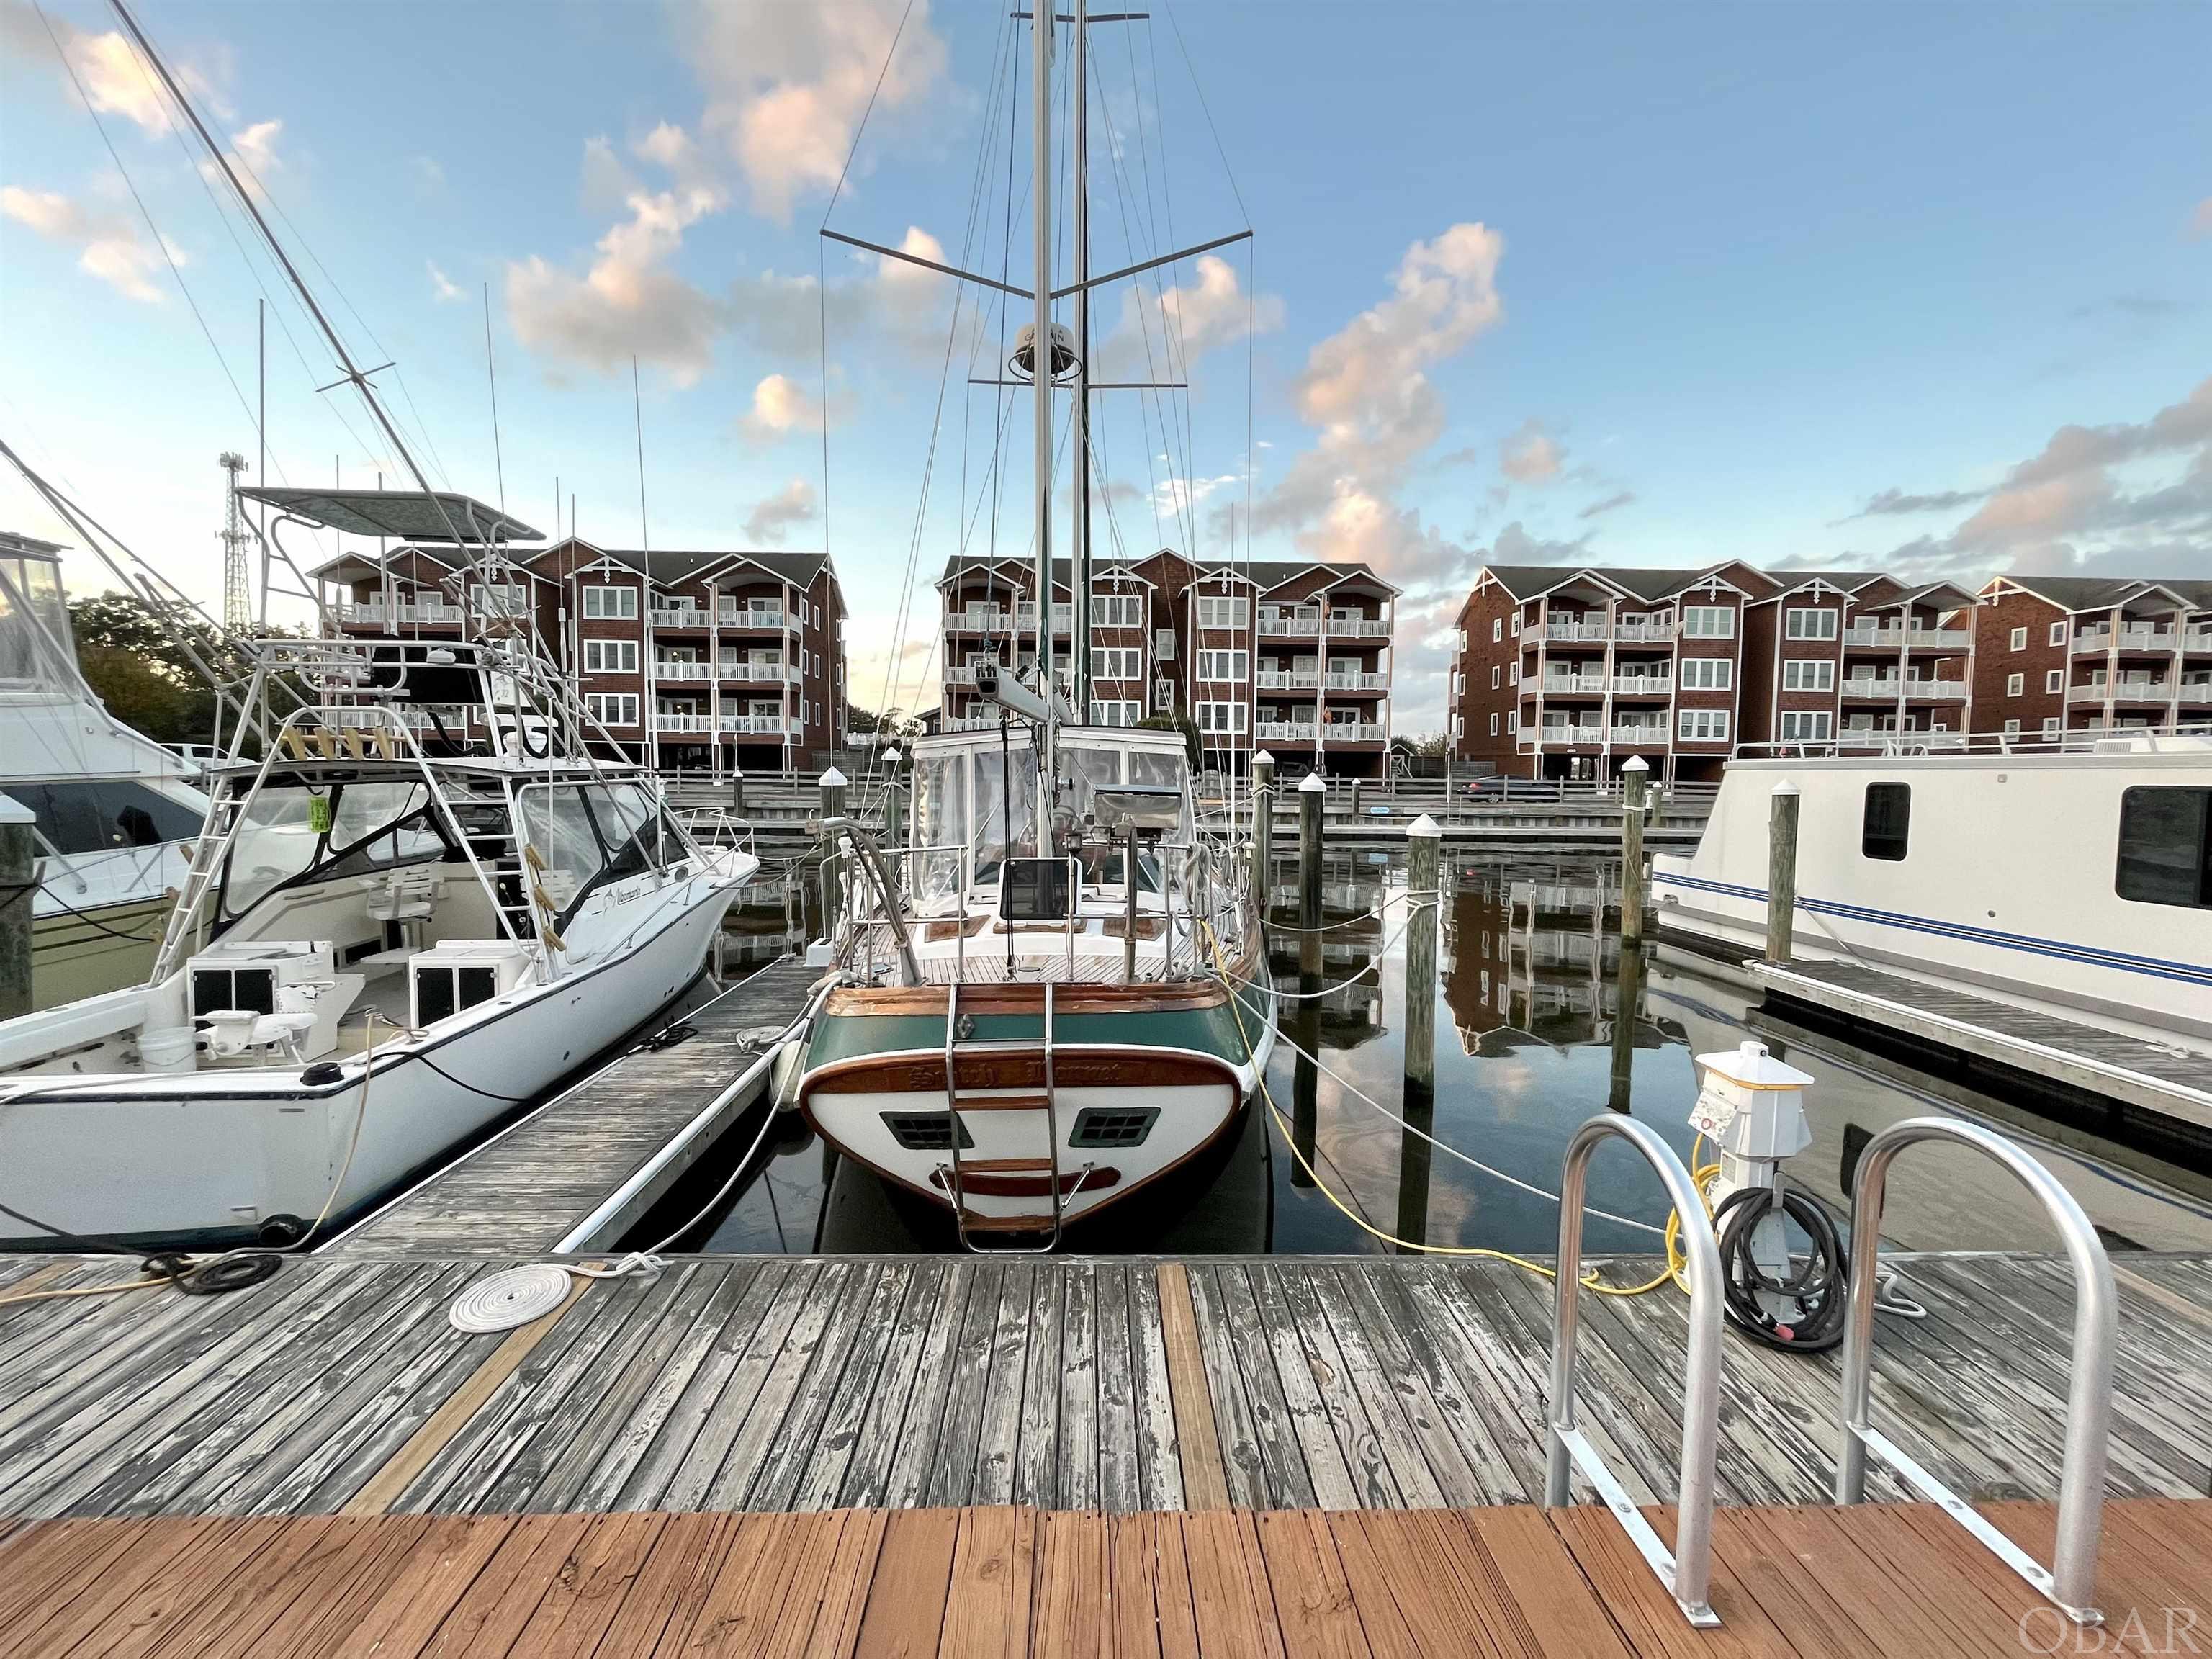 Protected boat slip in highly coveted Shallowbag Bay.  Enjoy the community amenities that include, buy are not limited to a community pool, fitness center, and clubhouse.  This slot is tucked back away from open water and open great protection.